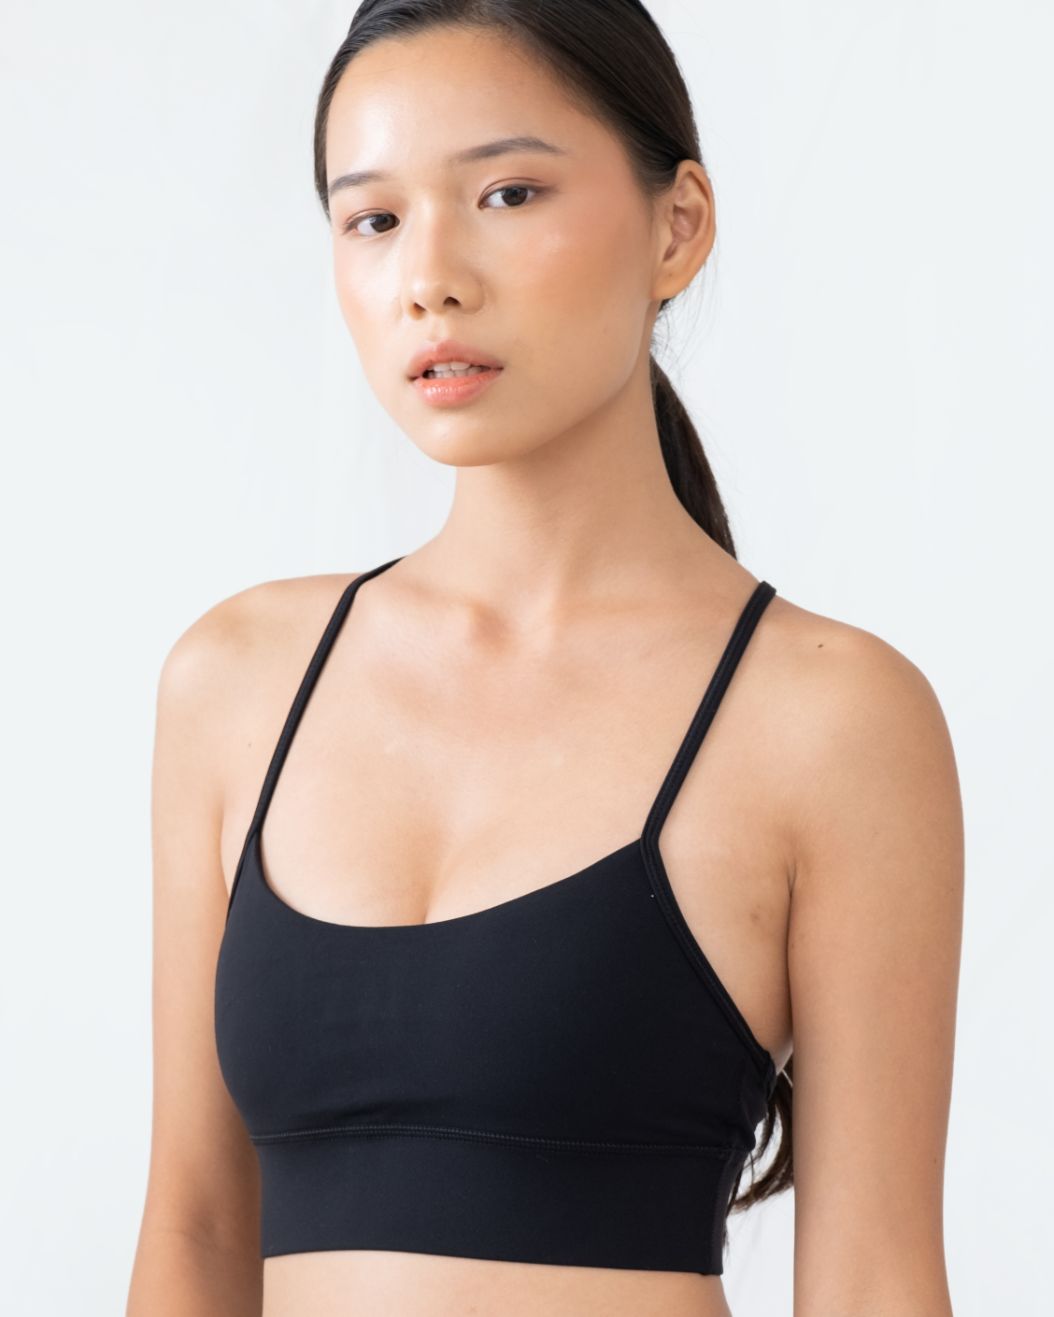 Vibrant Y Bra, Light Support with A/B cup